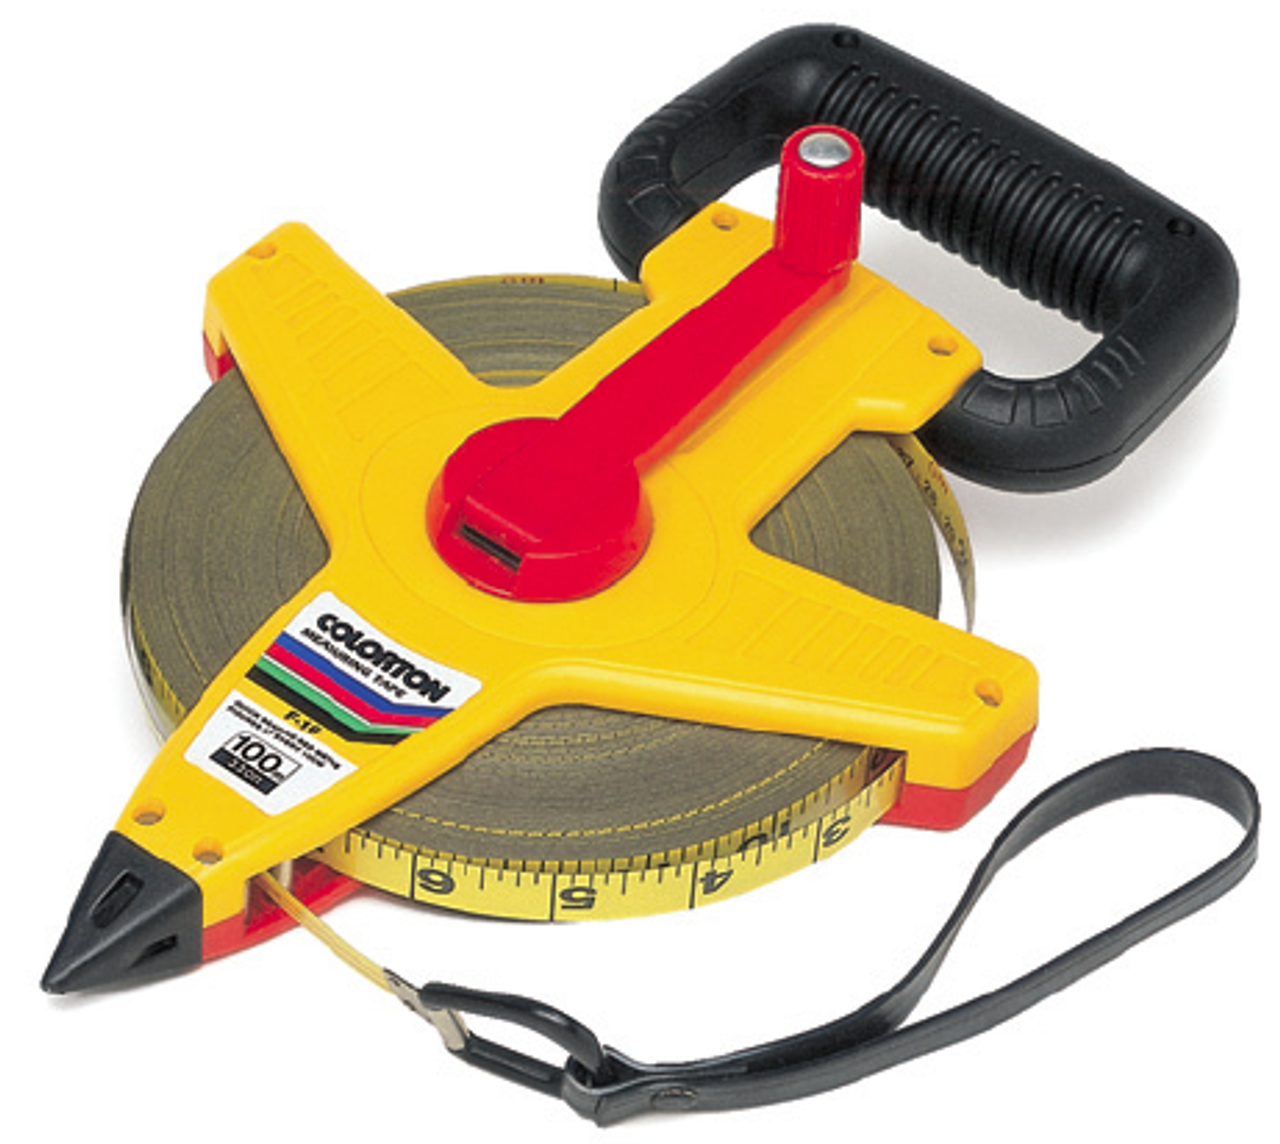 Open-Reel and Closed-Reel Measuring Tapes - Gopher Sport